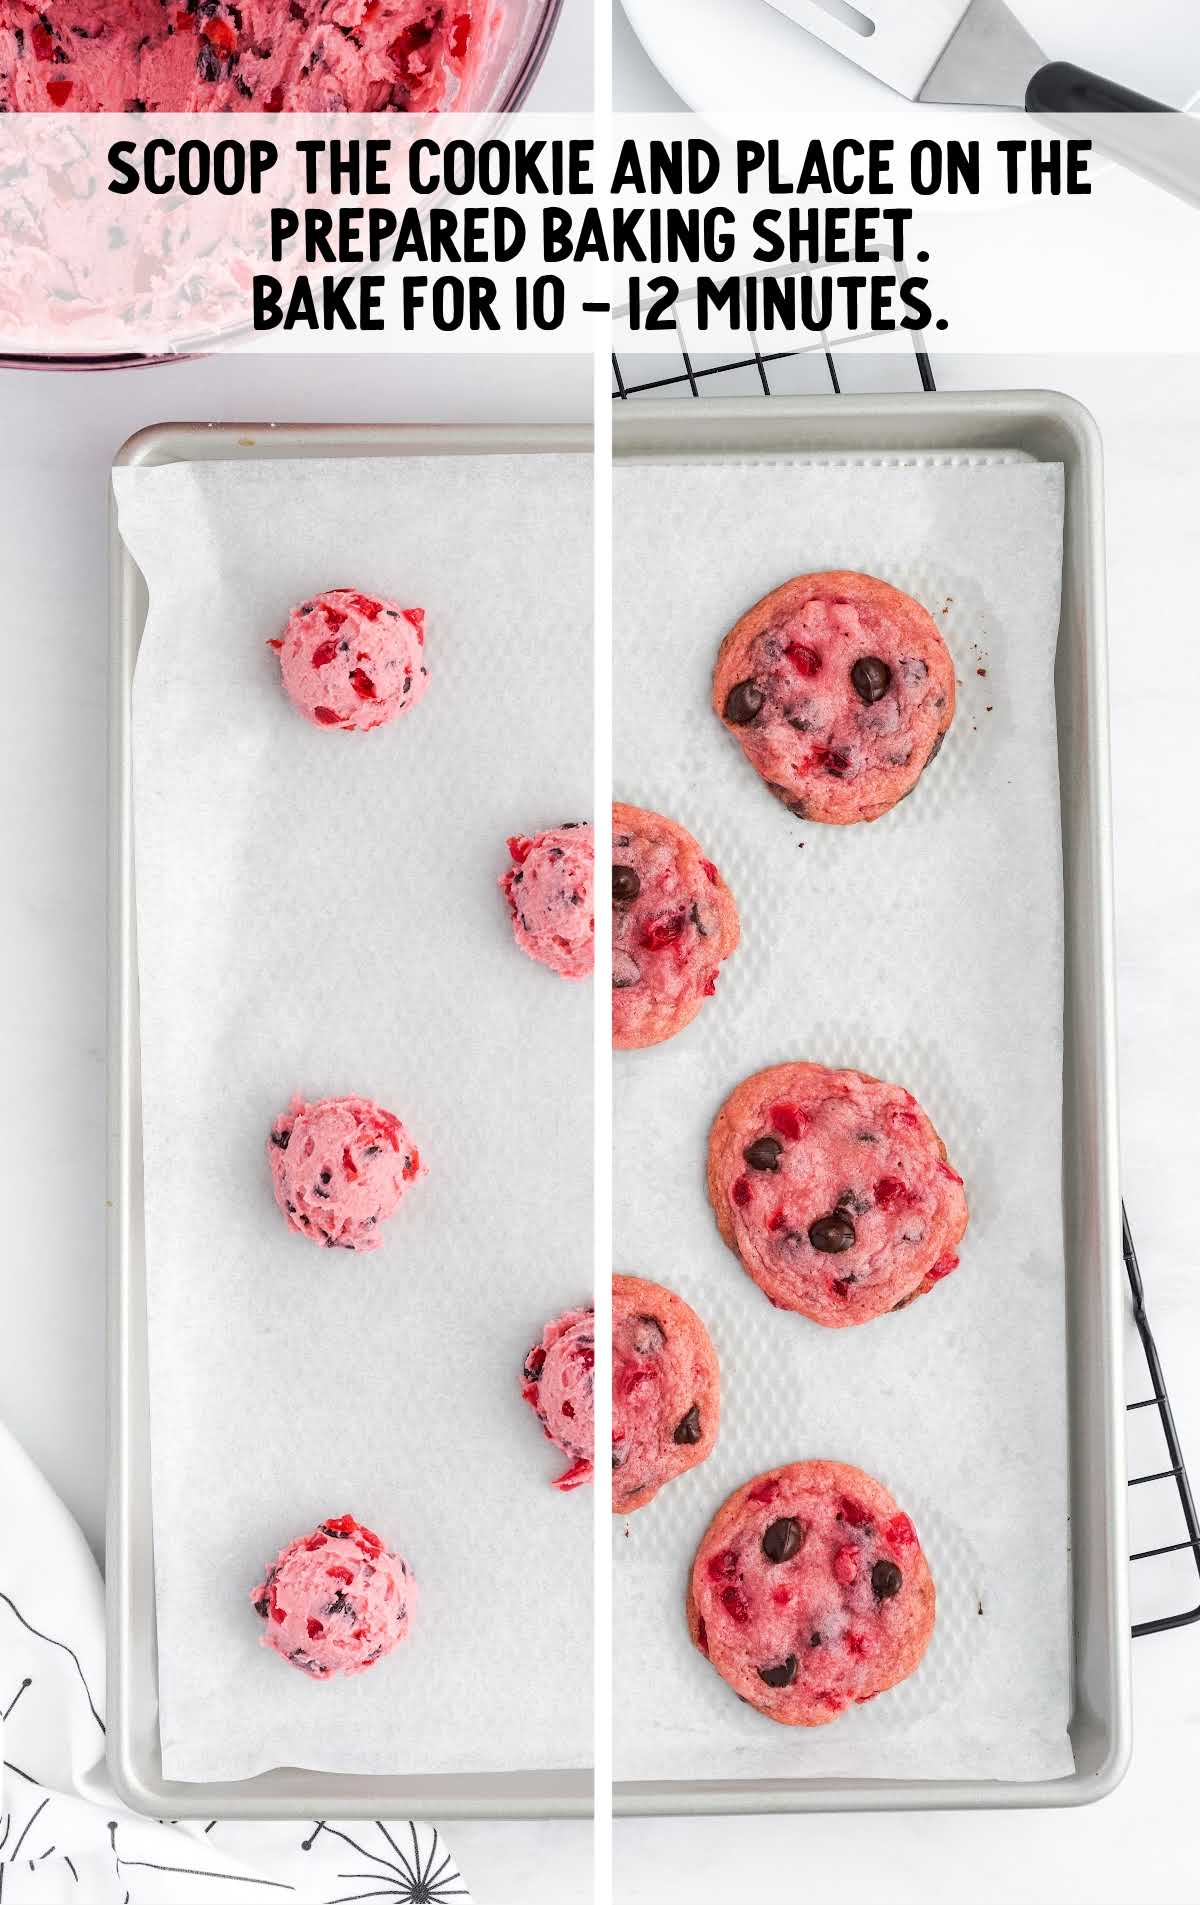 balls of cookie dough placed onto a baking sheet then baked